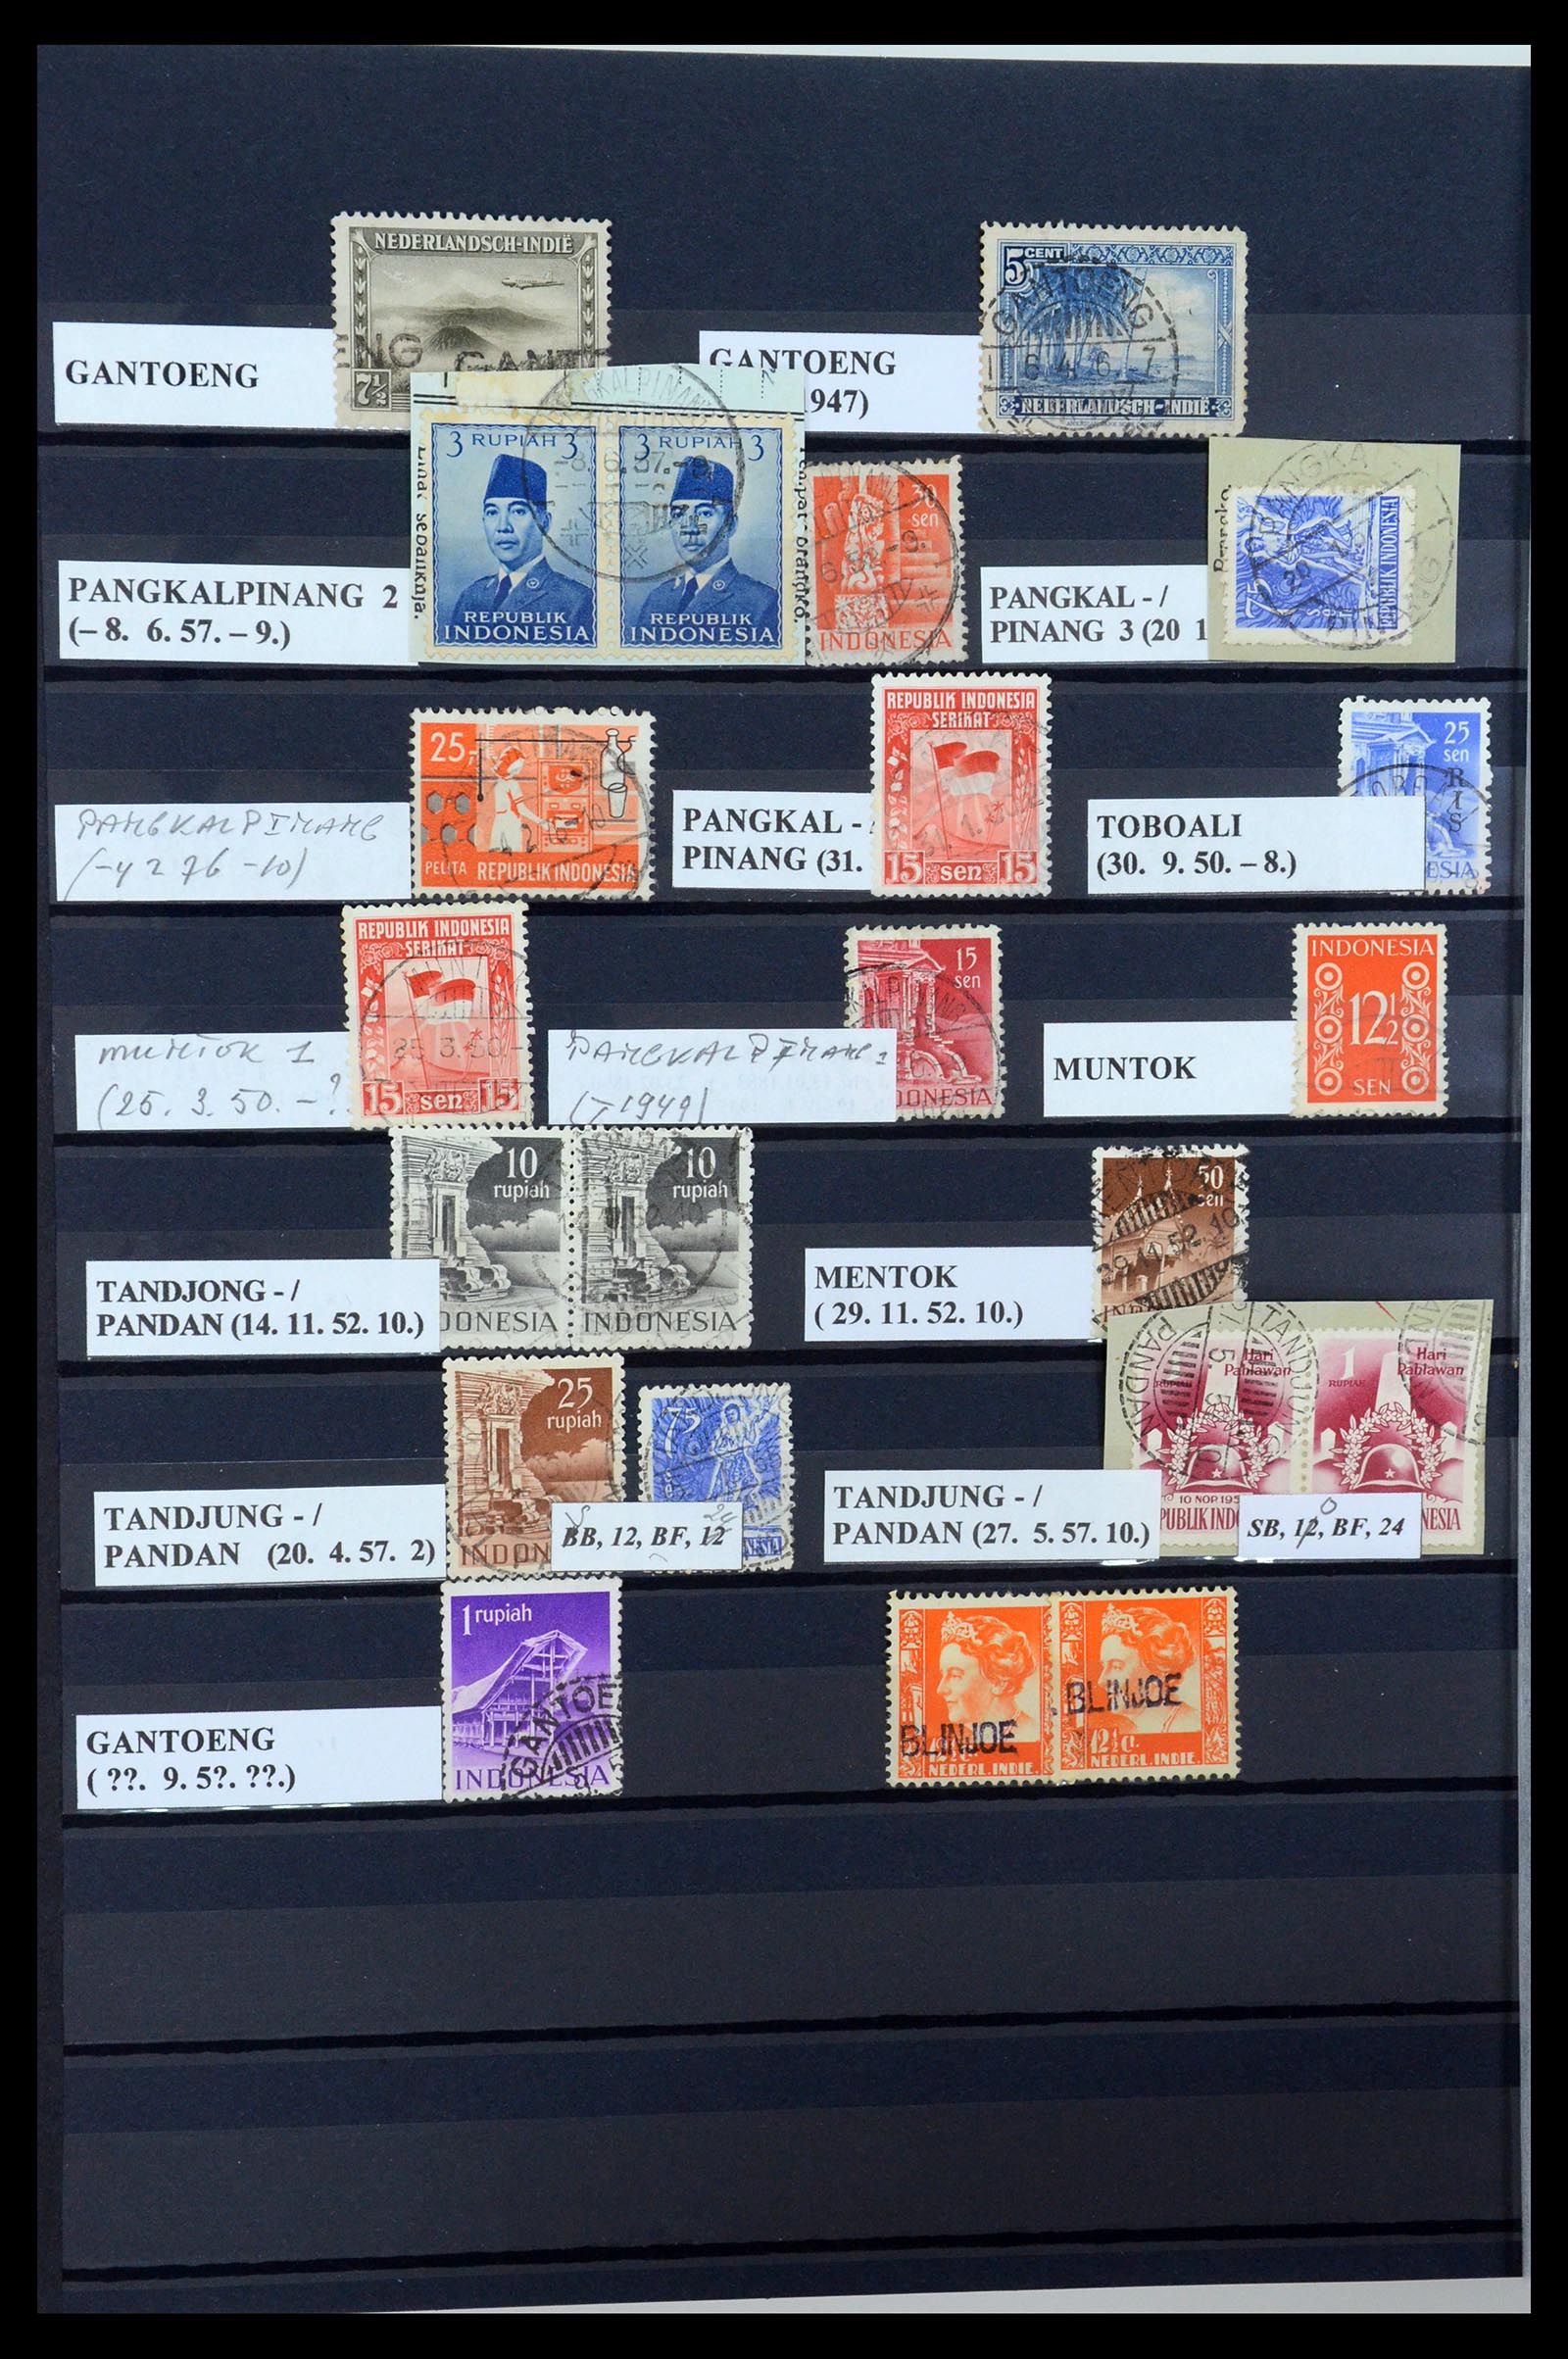 35612 029 - Stamp Collection 35612 Dutch east Indies cancels.